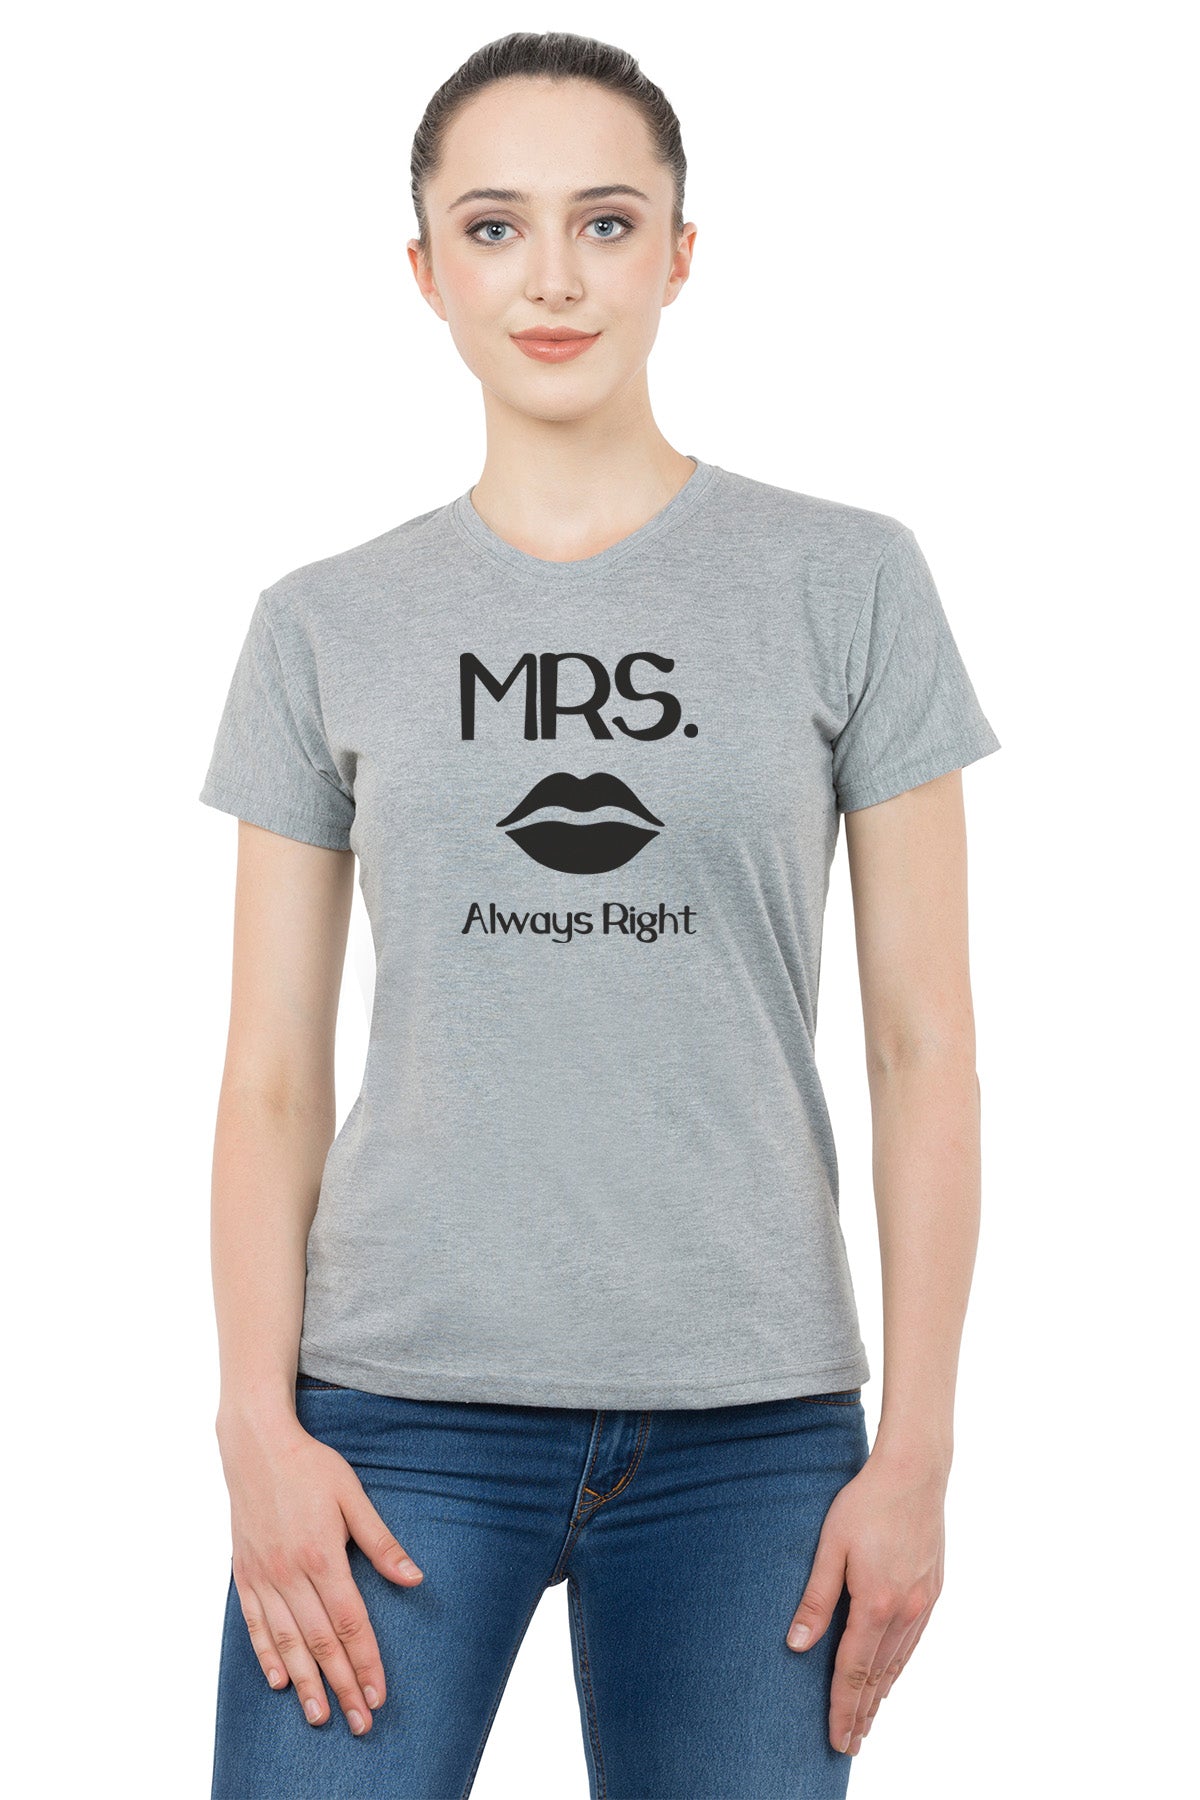 Mr. Mrs. Always Right matching Couple T shirts- Grey